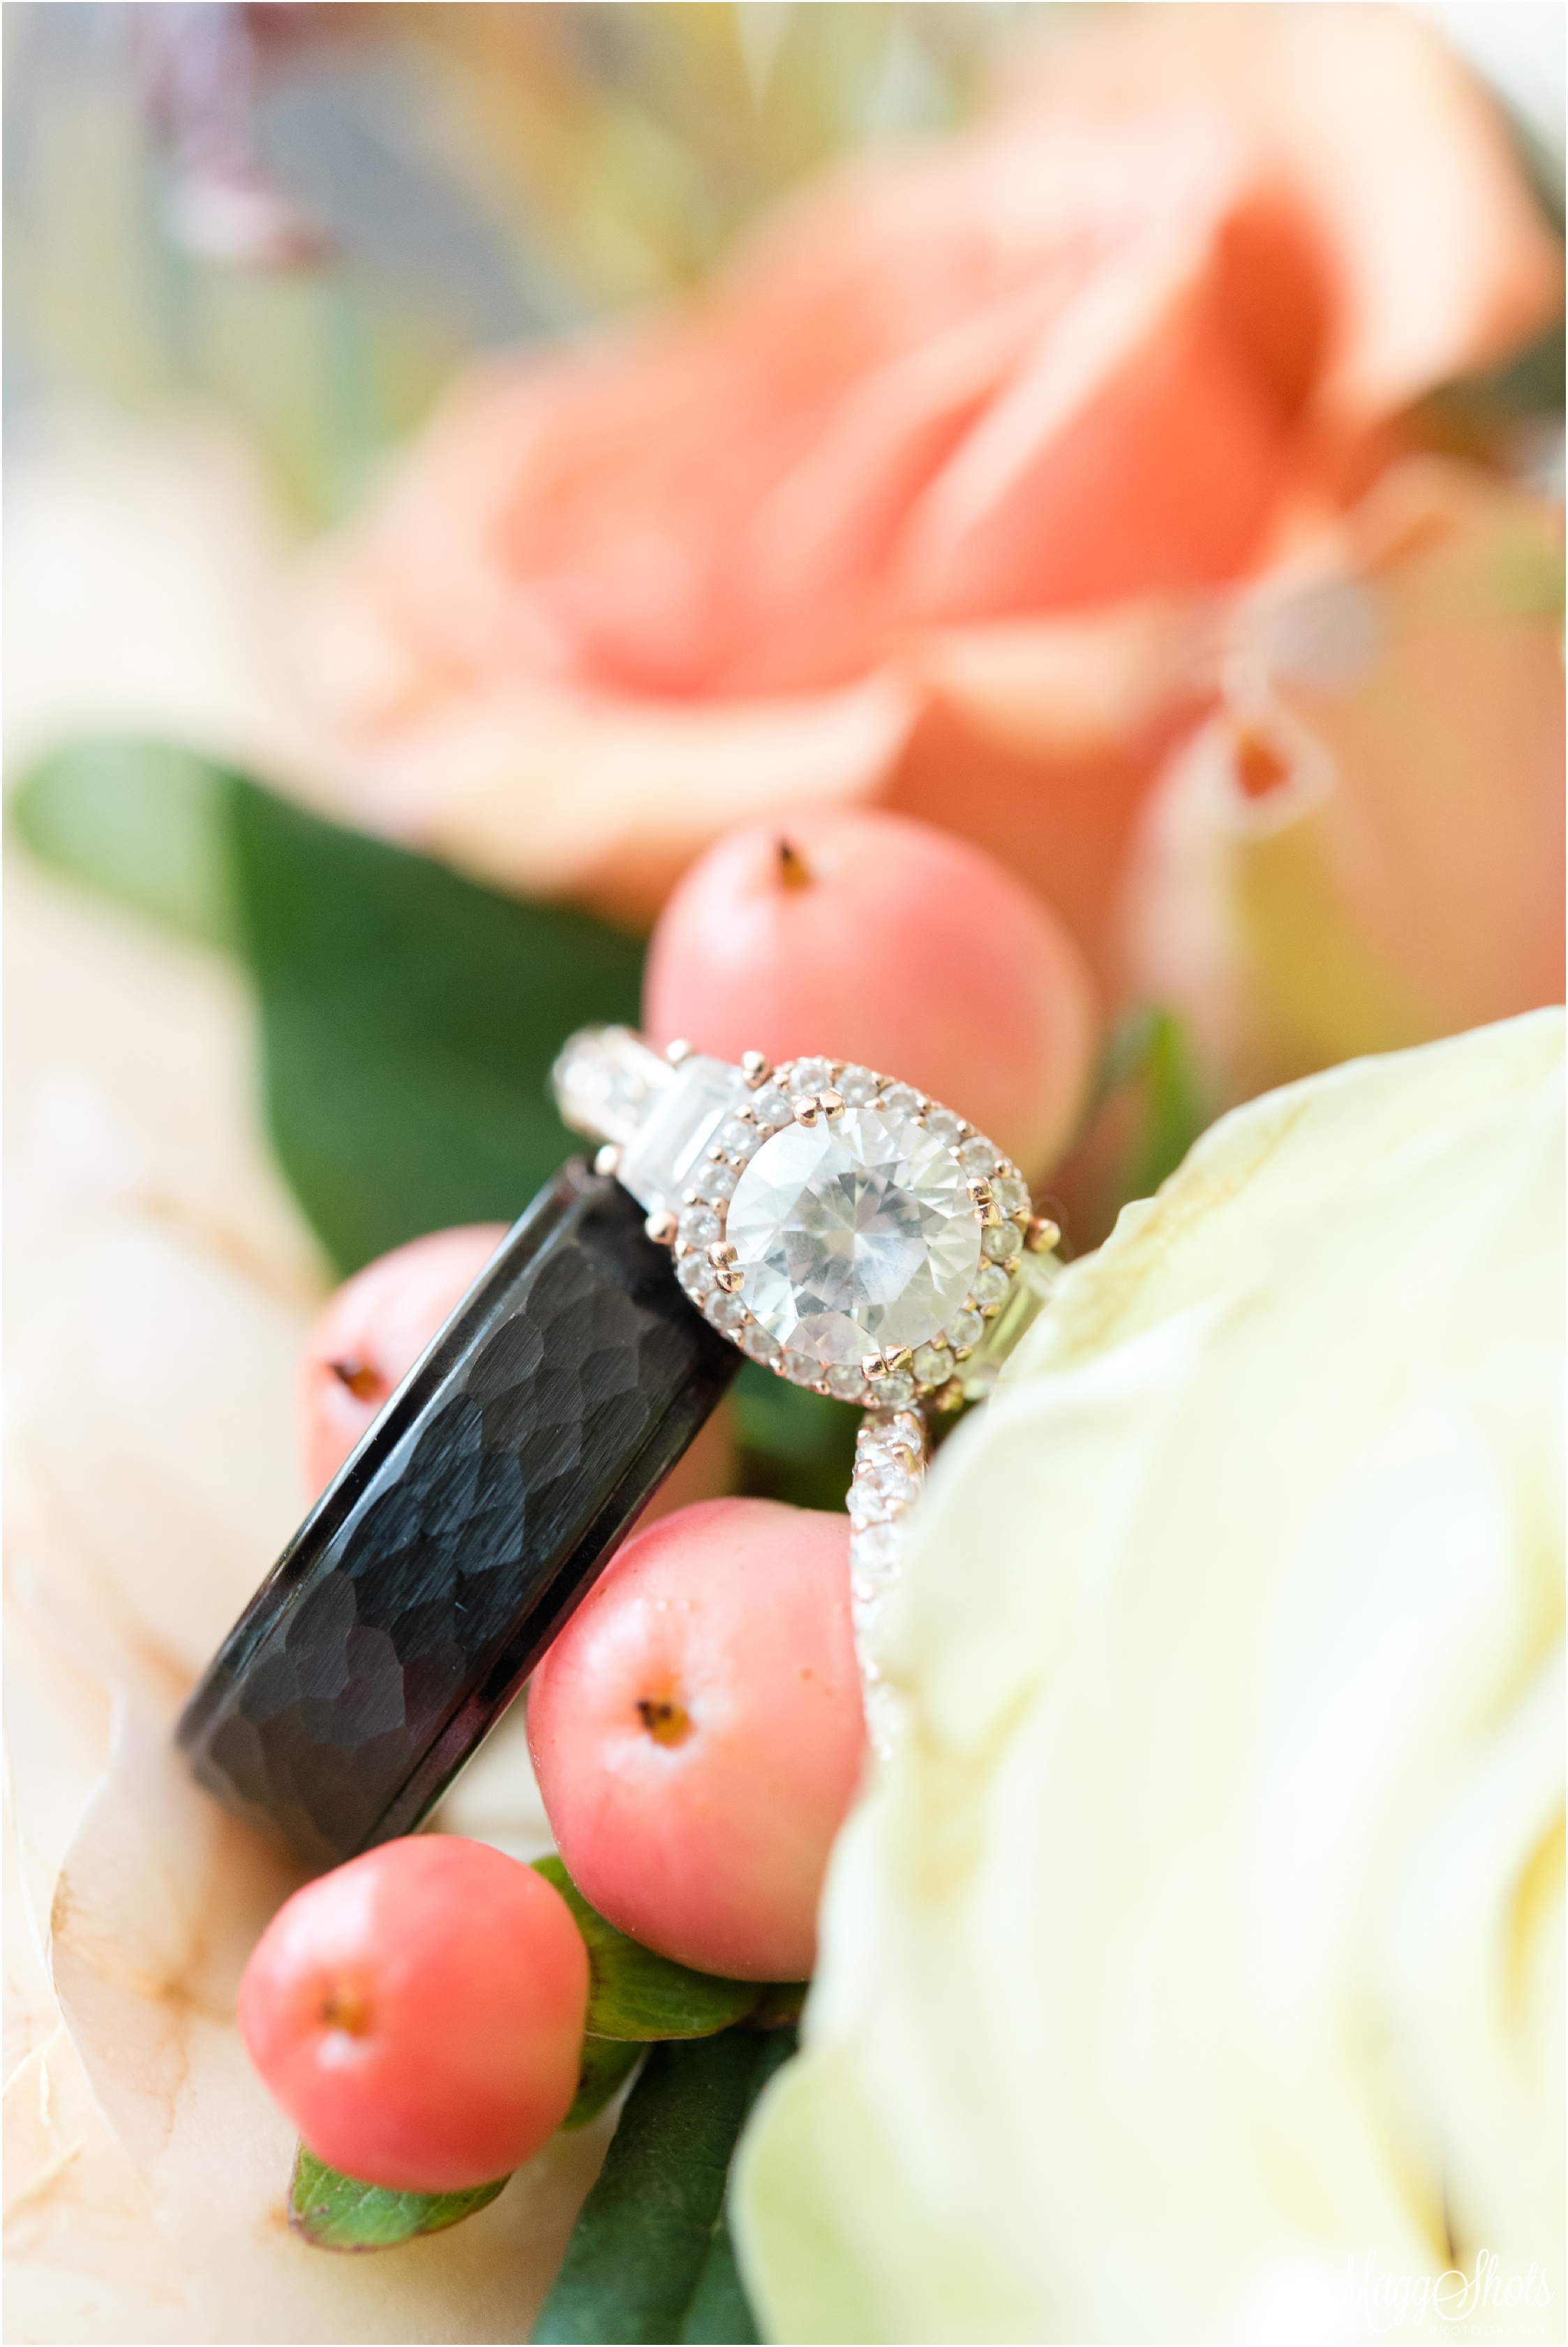 Ashton Gardens Wedding DFW Wedding Photographer Professional Photographer MaggShots Photographer MaggShots Romantics Love Mr and Mrs Husband and Wife Married Ringshot Rings Sparkle